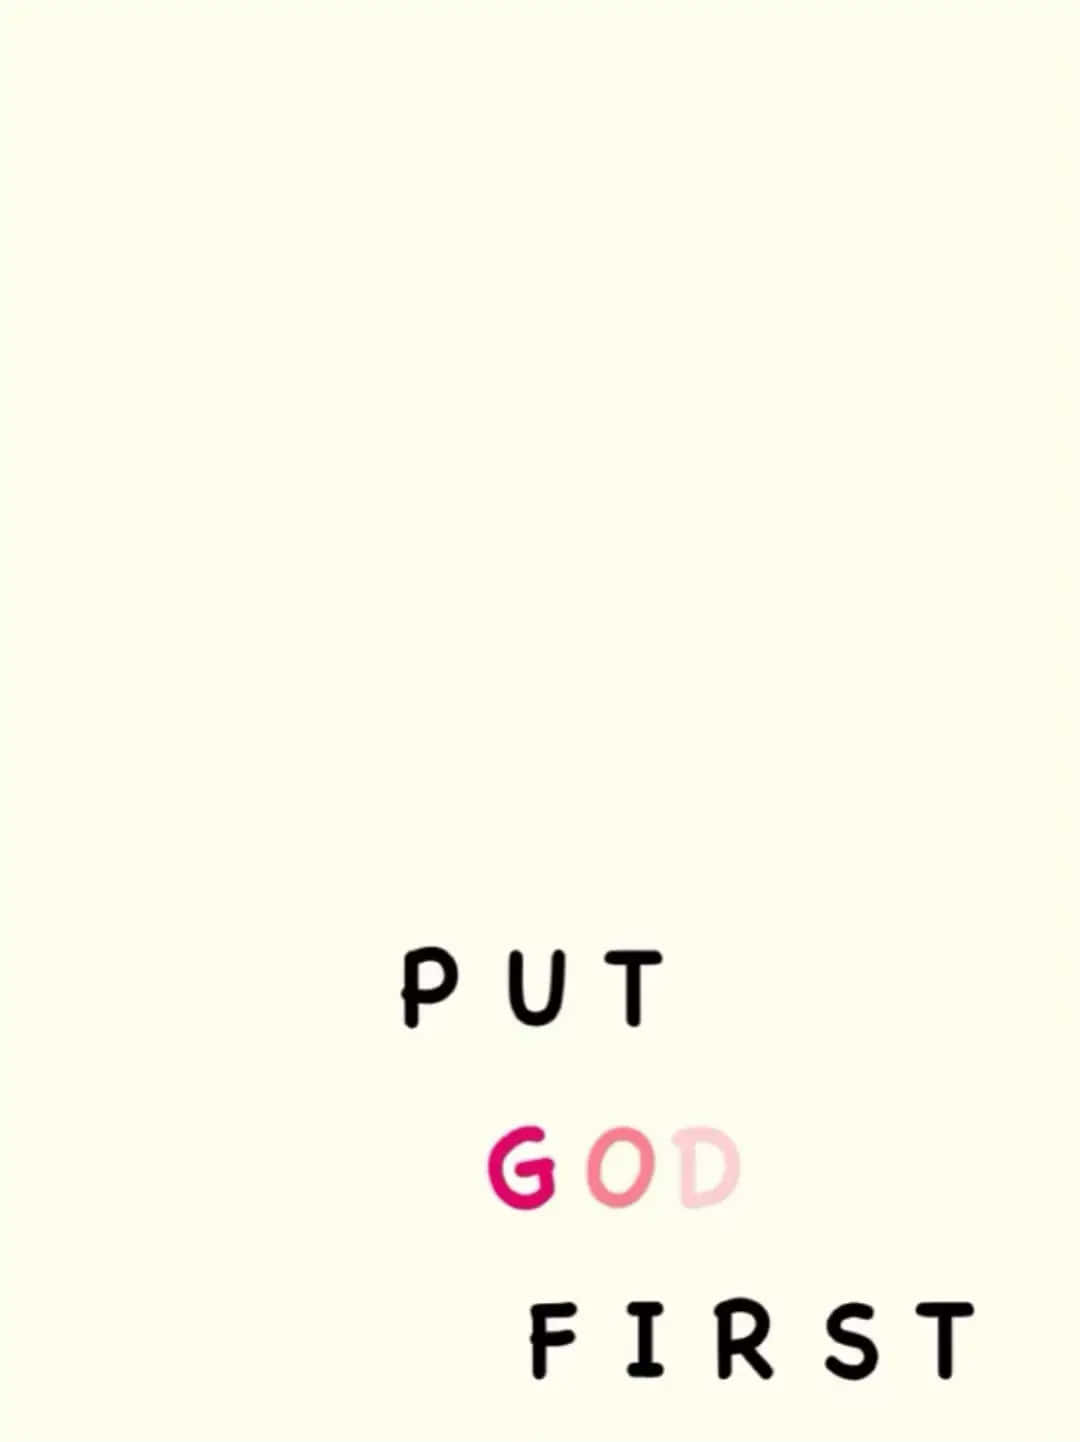 Put God First Inspirational Quote Wallpaper